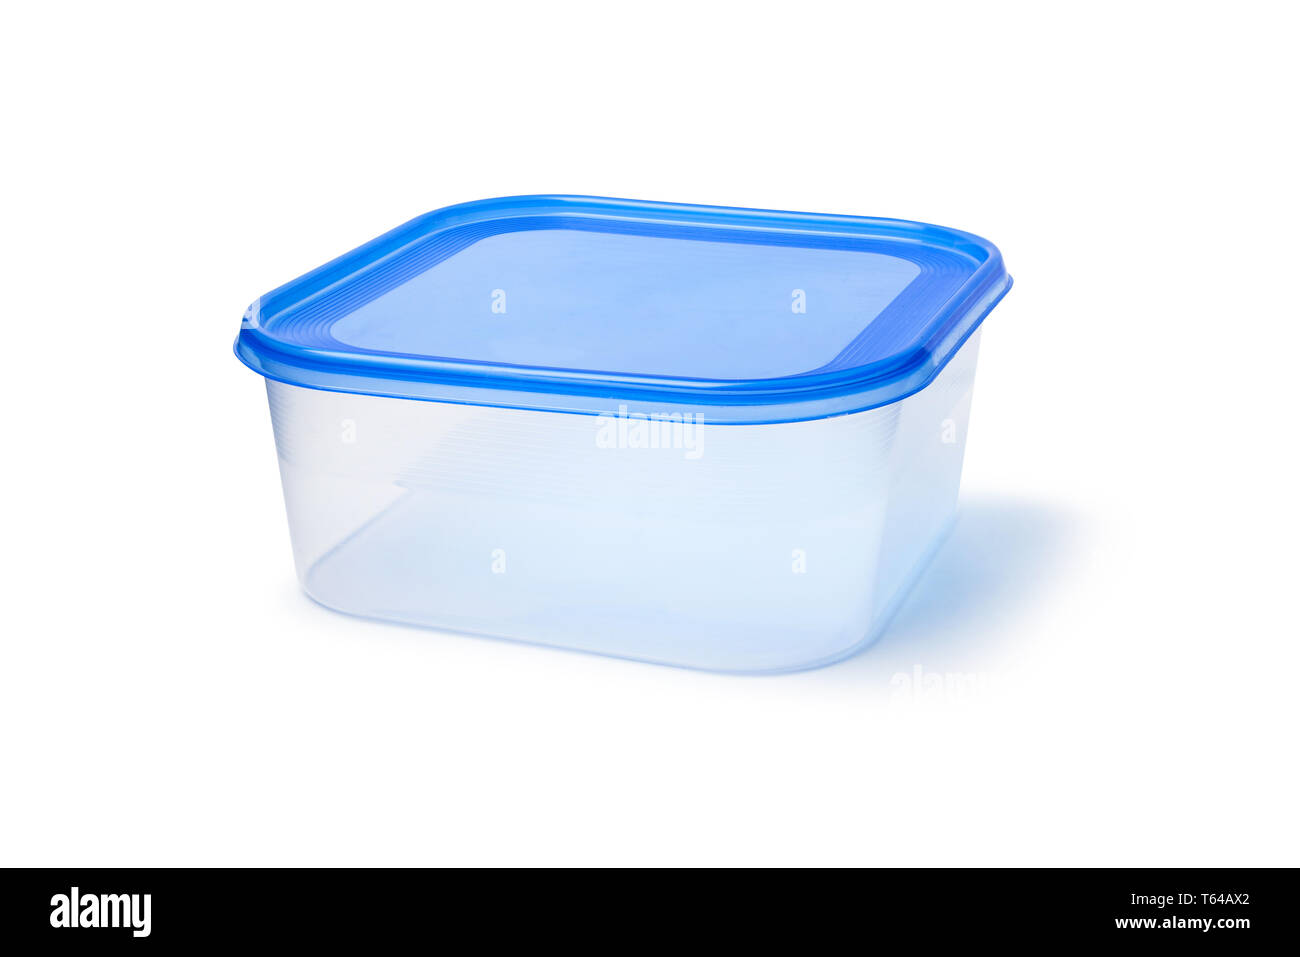 https://c8.alamy.com/comp/T64AX2/plastic-food-storage-containers-on-a-white-background-with-clipping-path-T64AX2.jpg